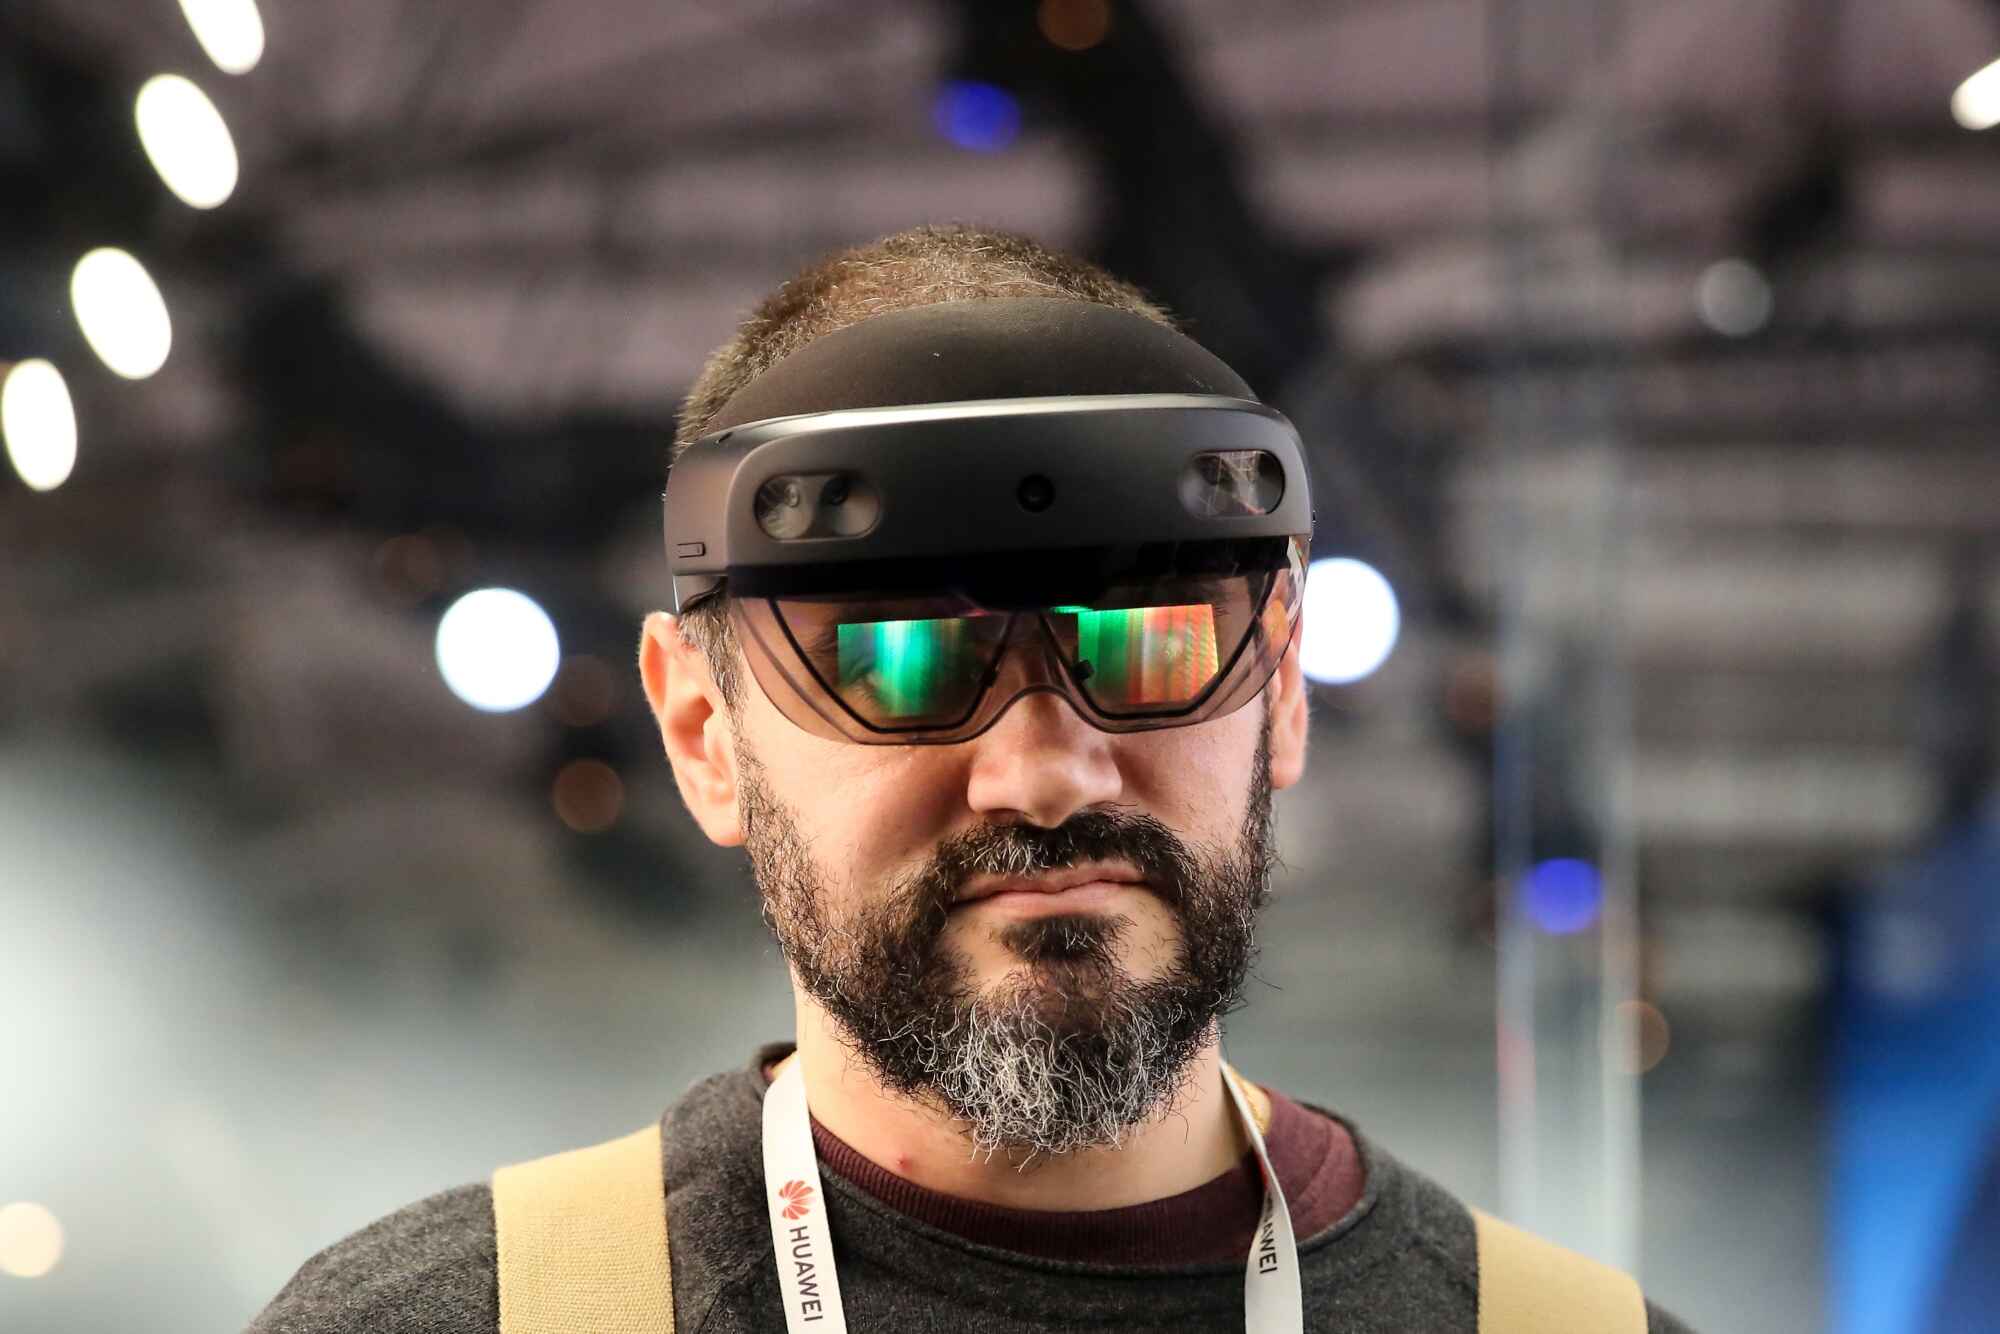 Who Is In Charge Of HoloLens